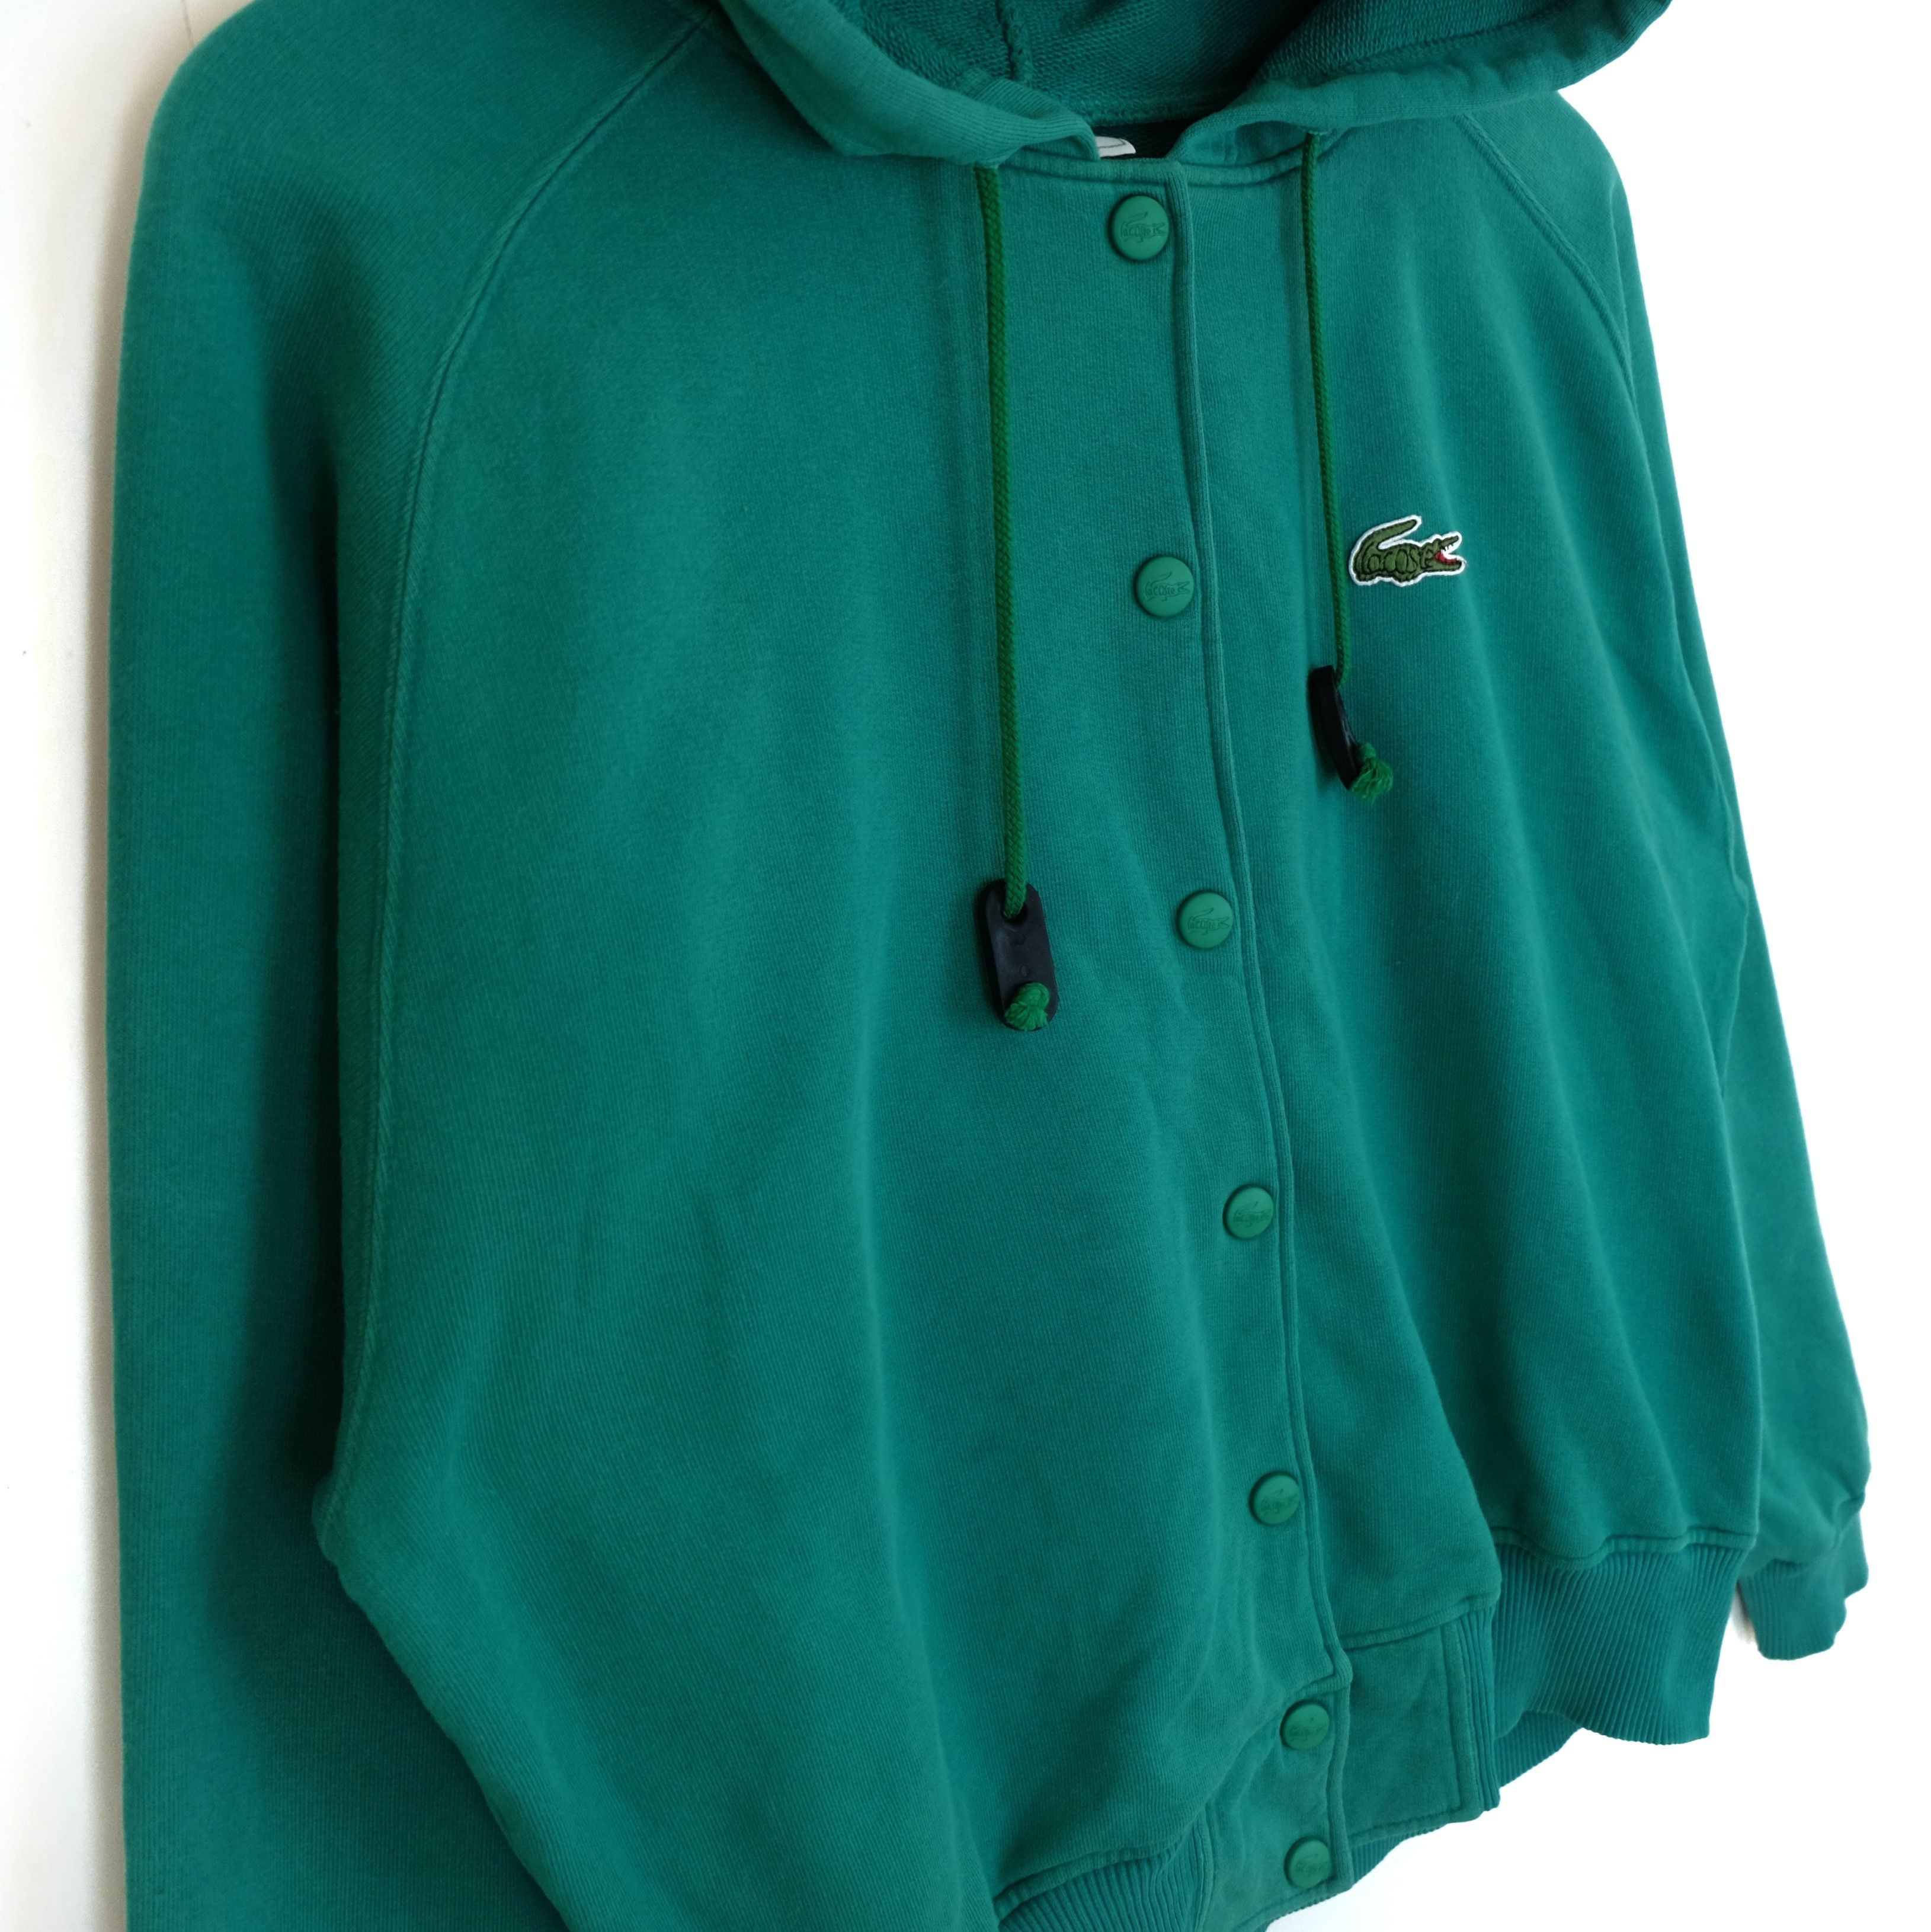 Lacoste LACOSTE Big Spell Out Logo Hoodie Size XL / US 12-14 / IT 48-50 - 6 Thumbnail